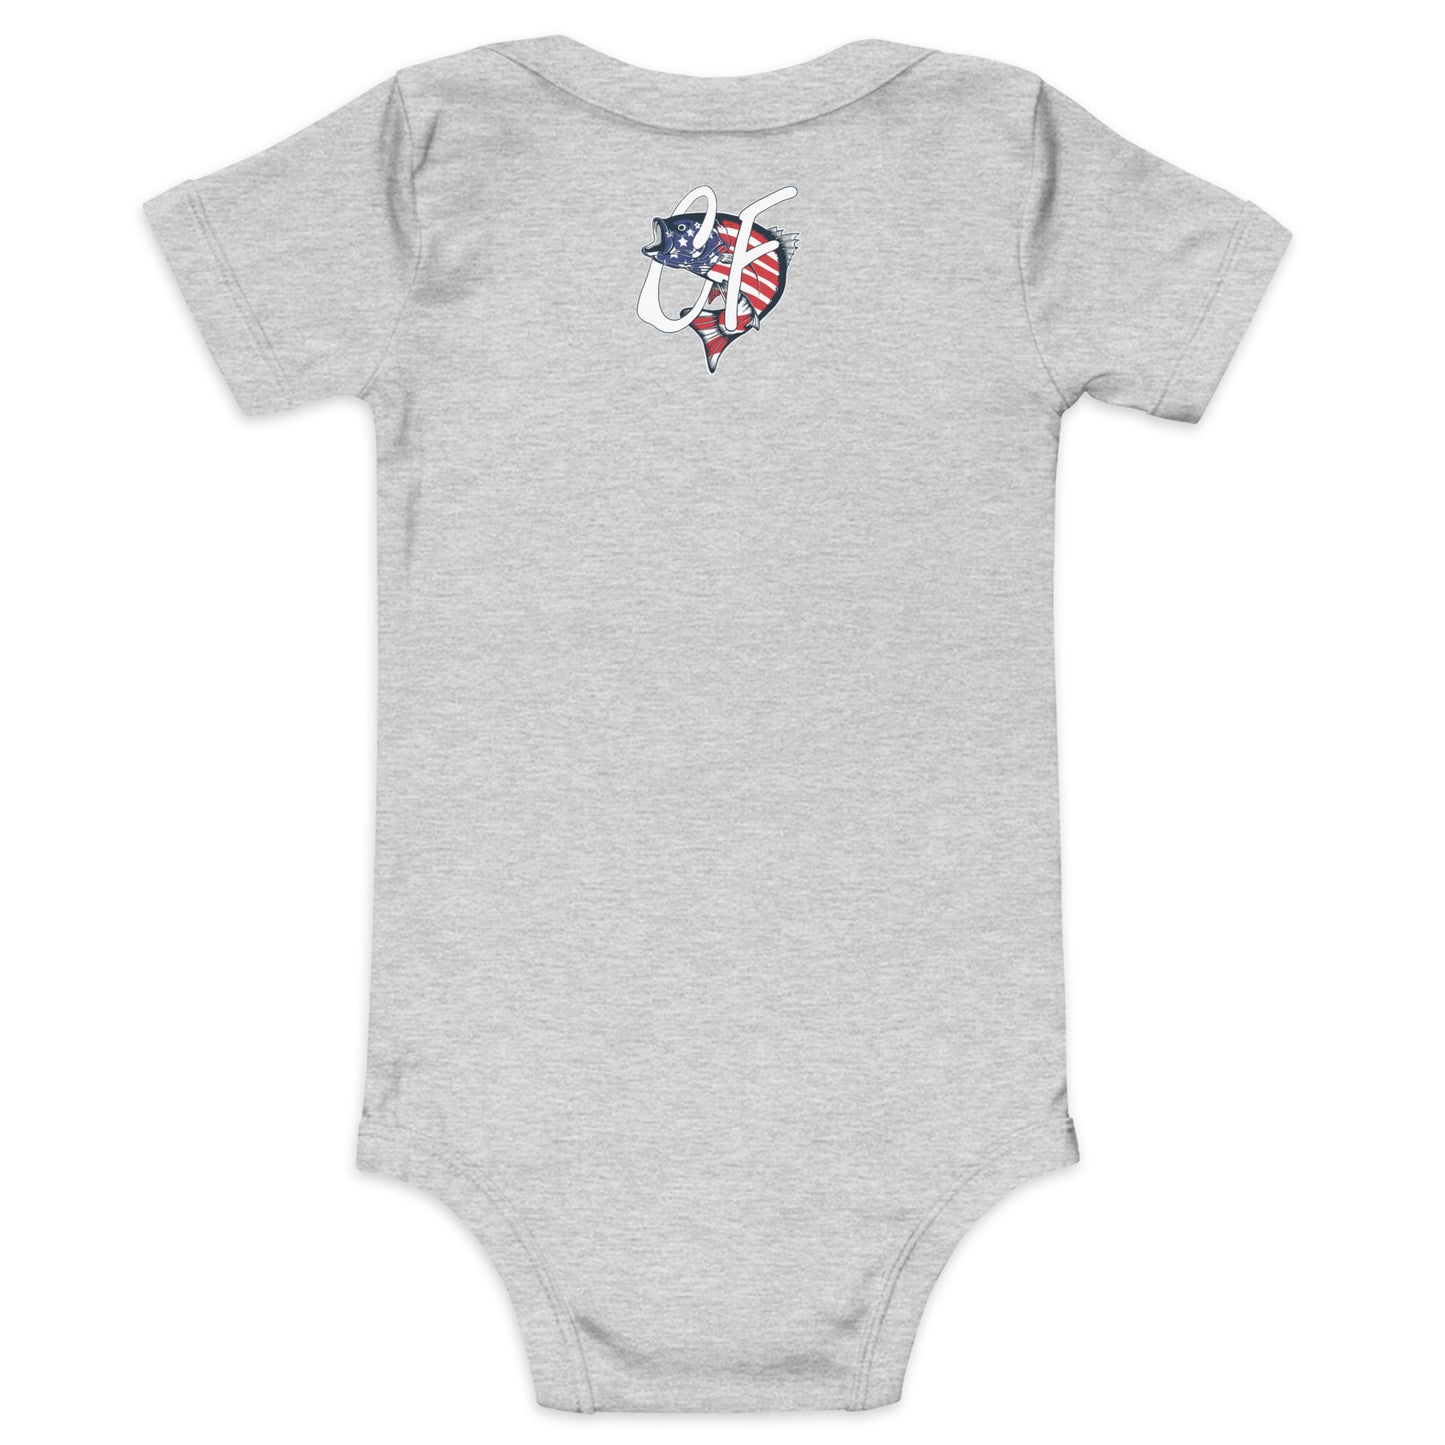 'United by Stripes' Baby Short Sleeve One Piece